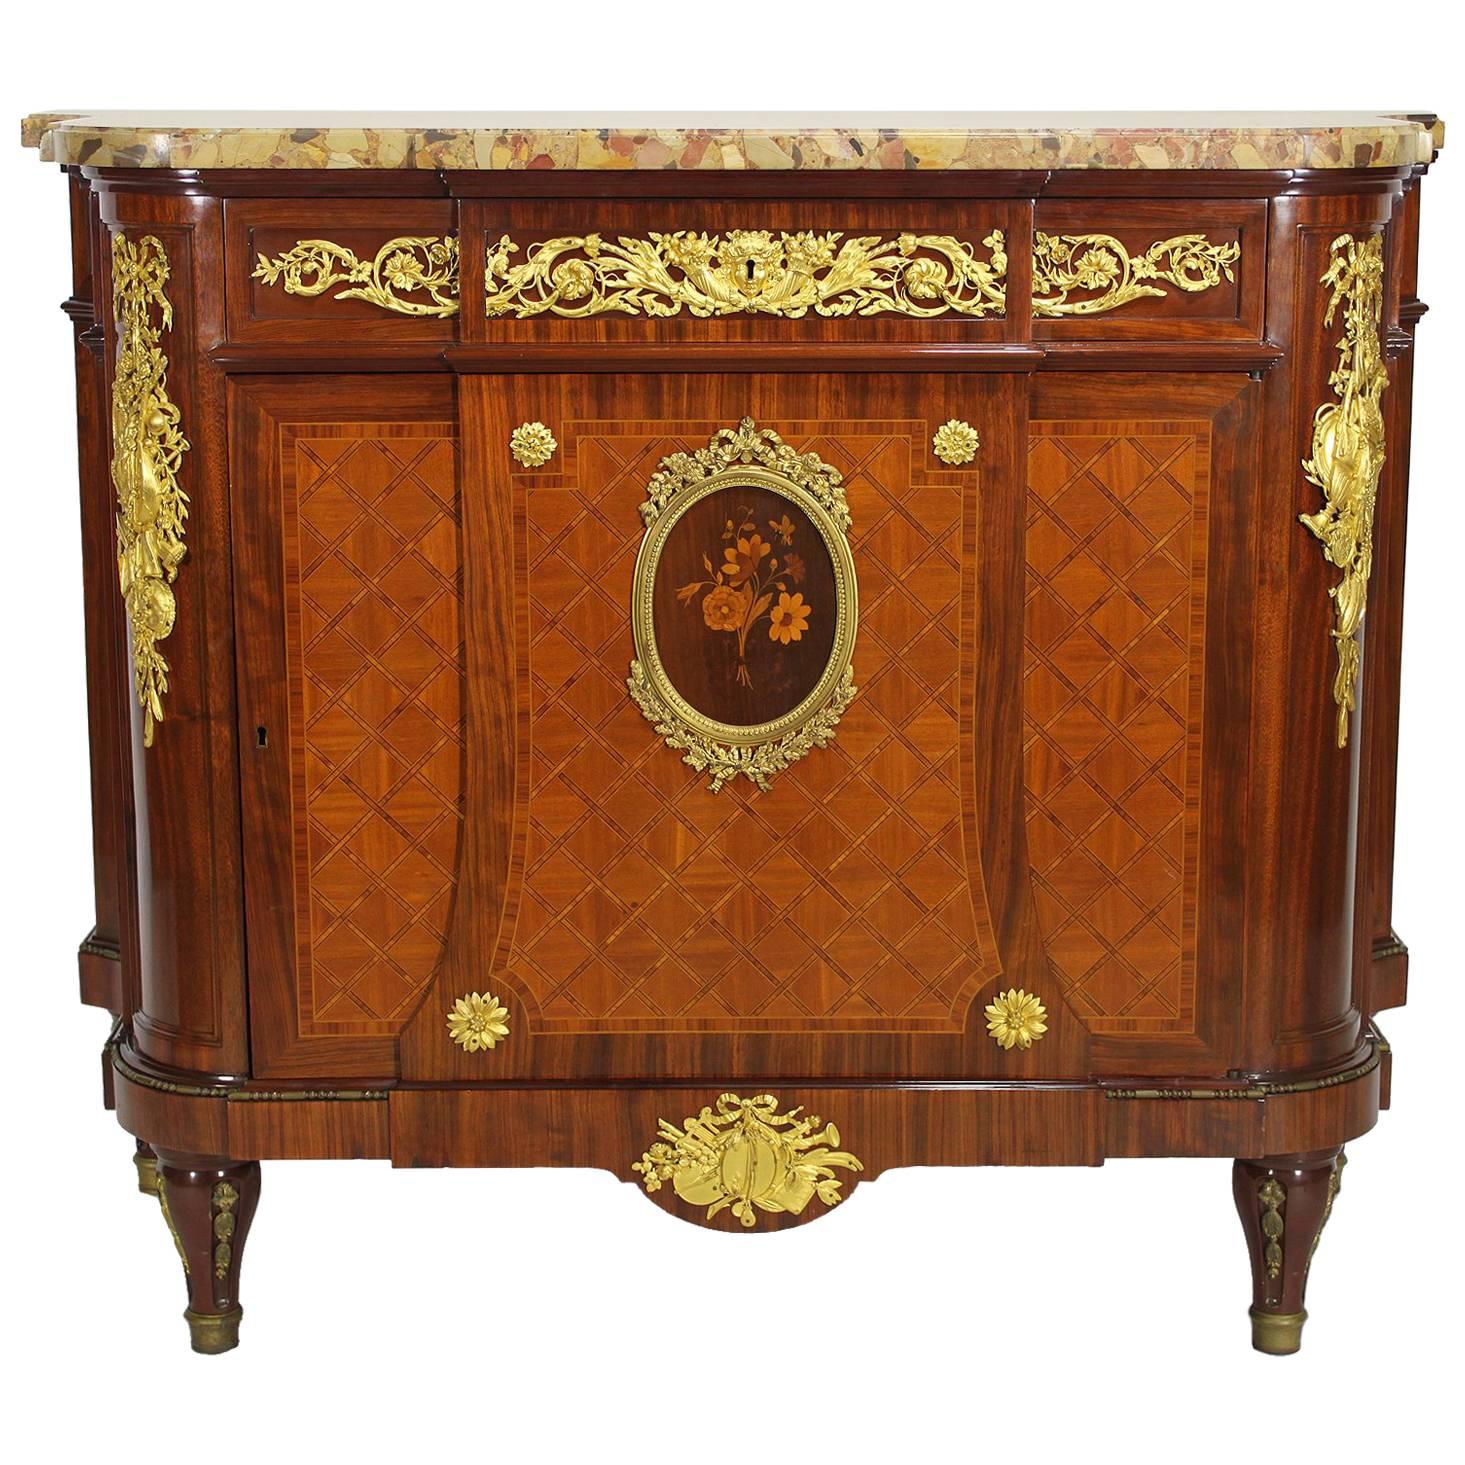 French 19th Century Louis XVI Style Ormolu-Mounted Marquetry Demilune Commode